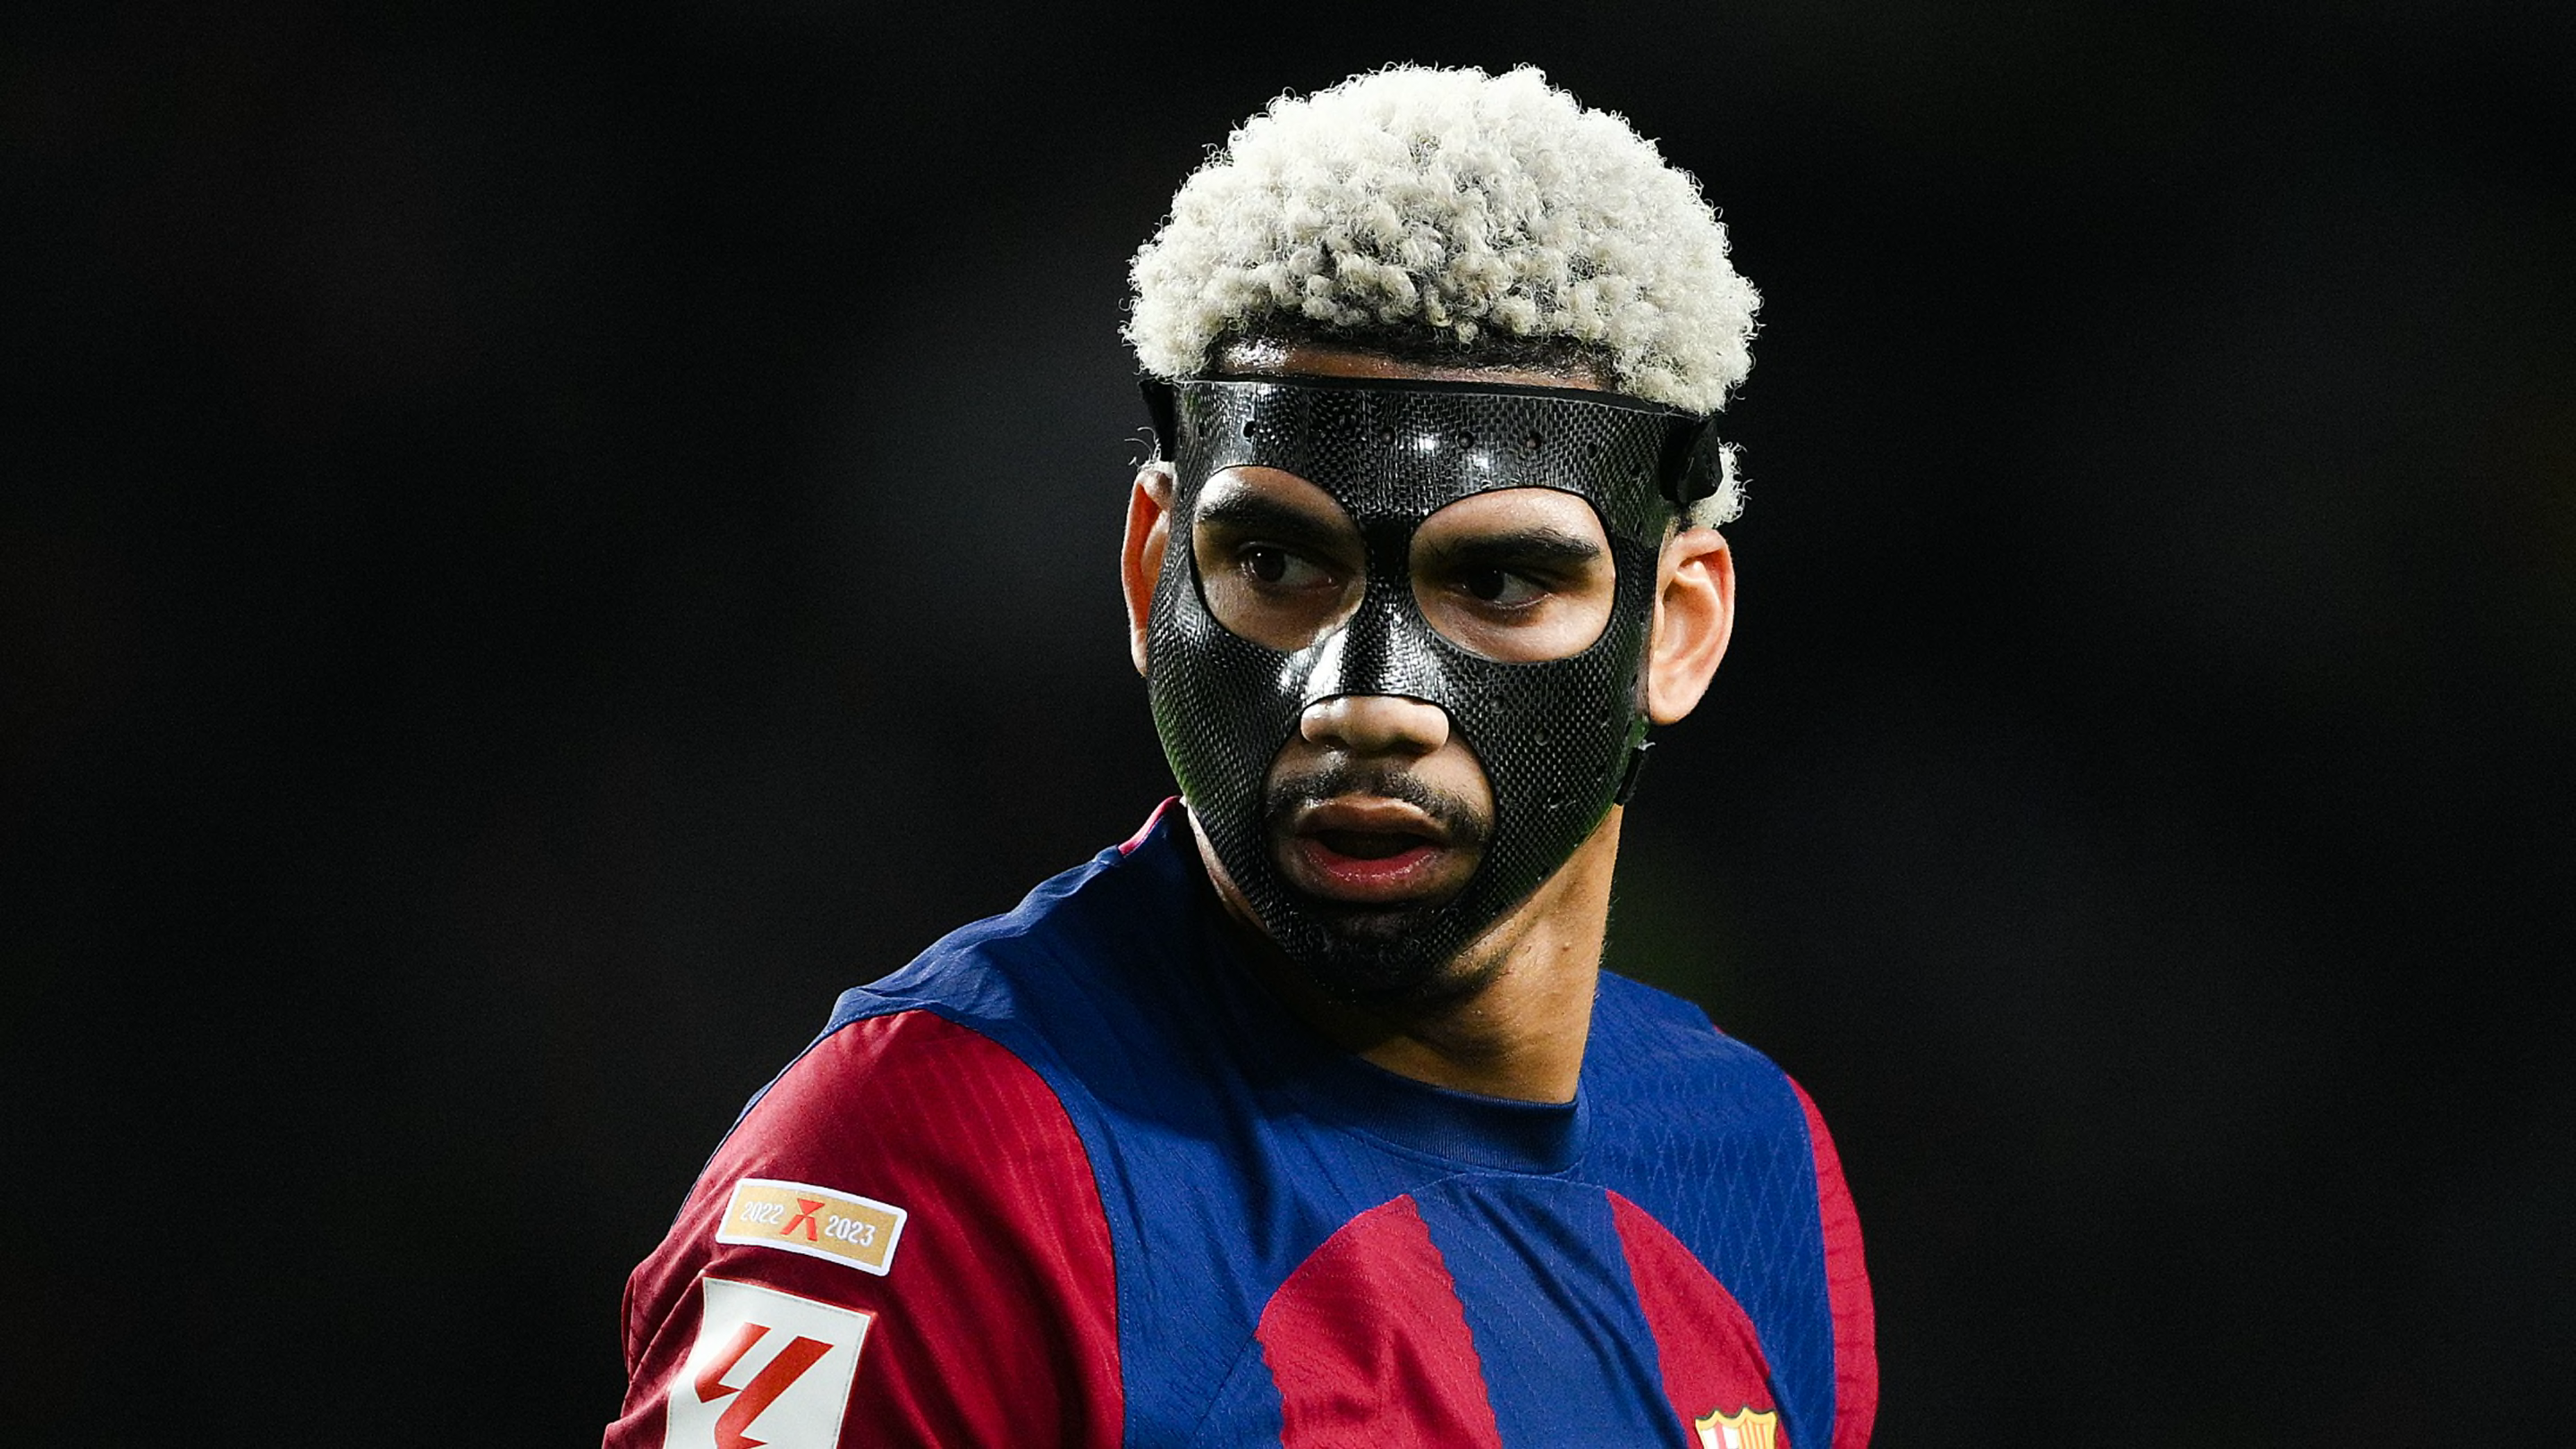 Why do soccer players wear masks?